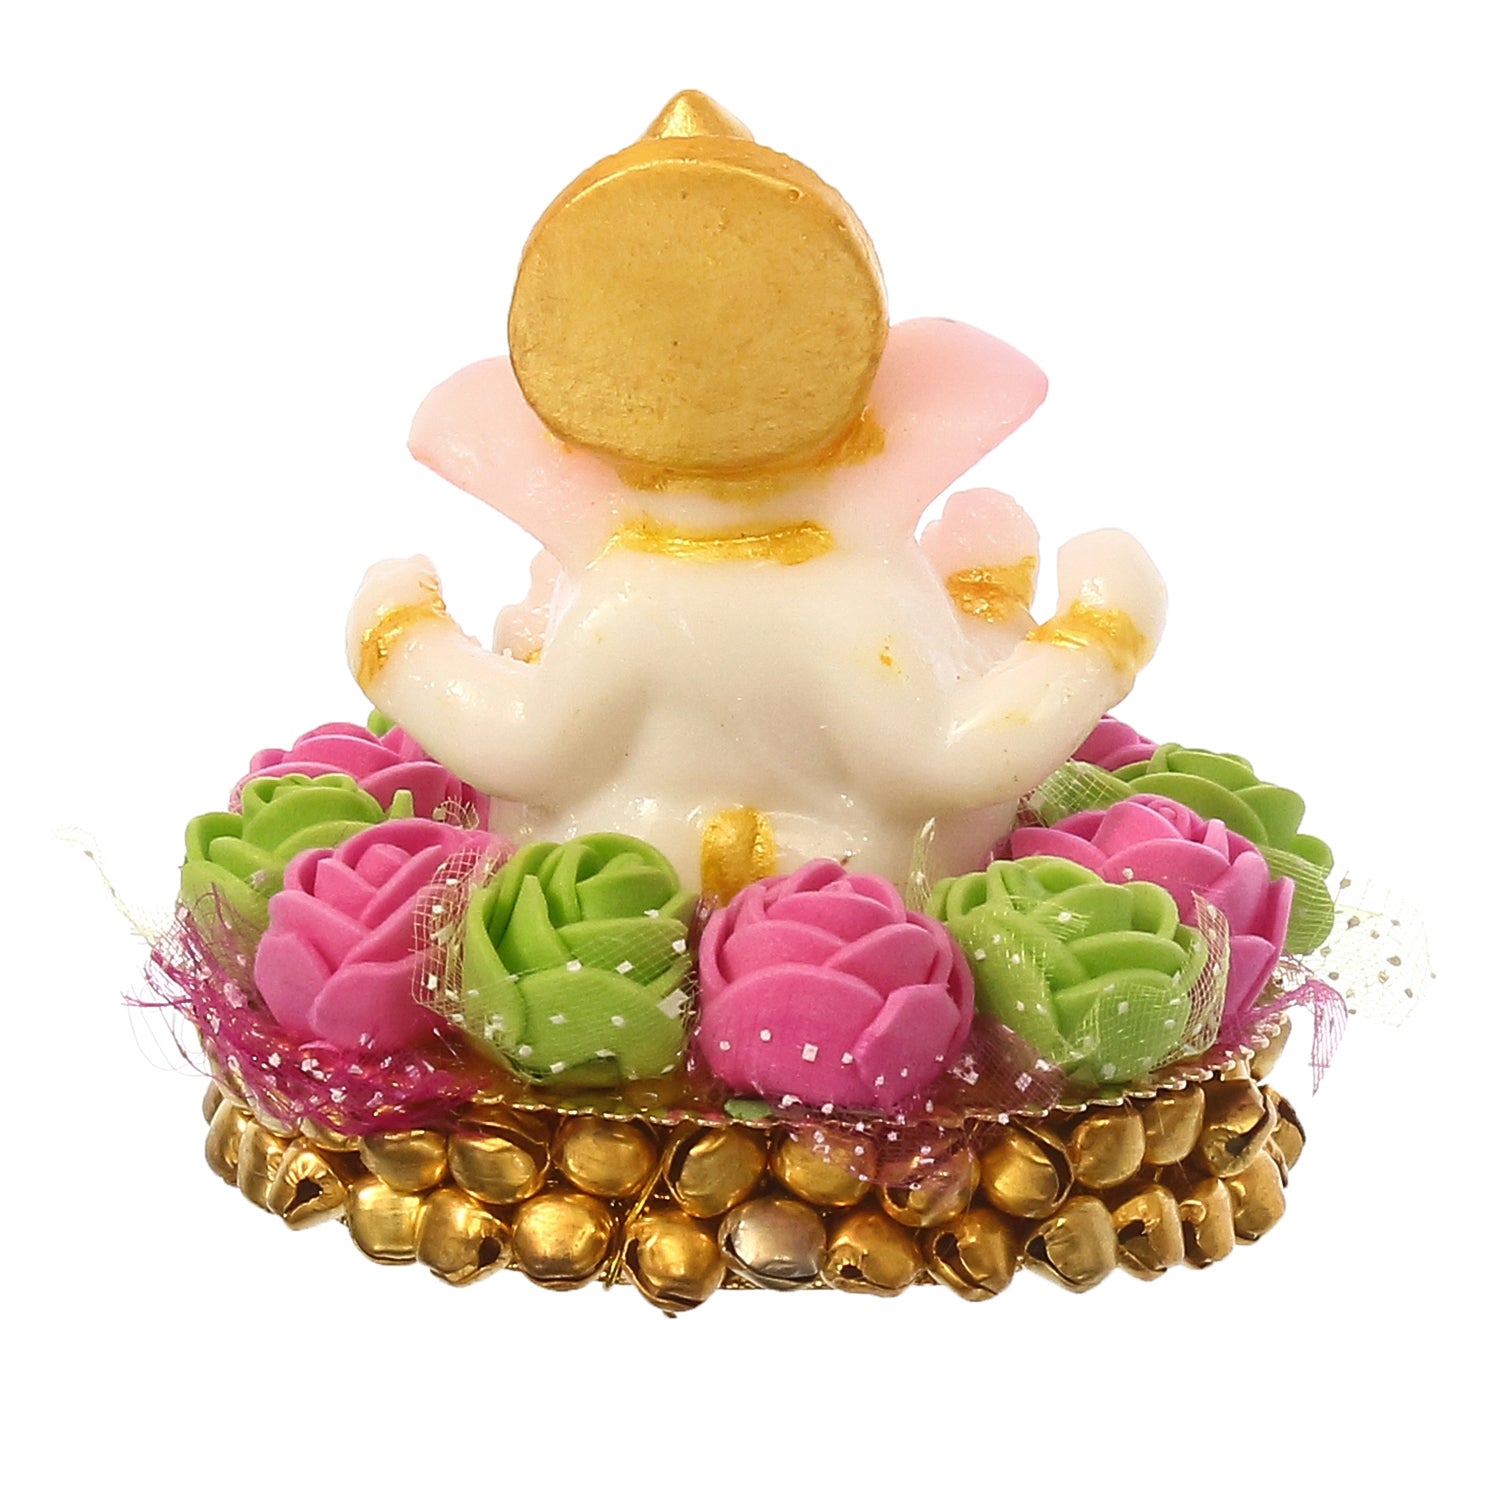 Golden and White Polyresin Lord Ganesha Idol on Decorative Pink and Green Flowers Plate 6